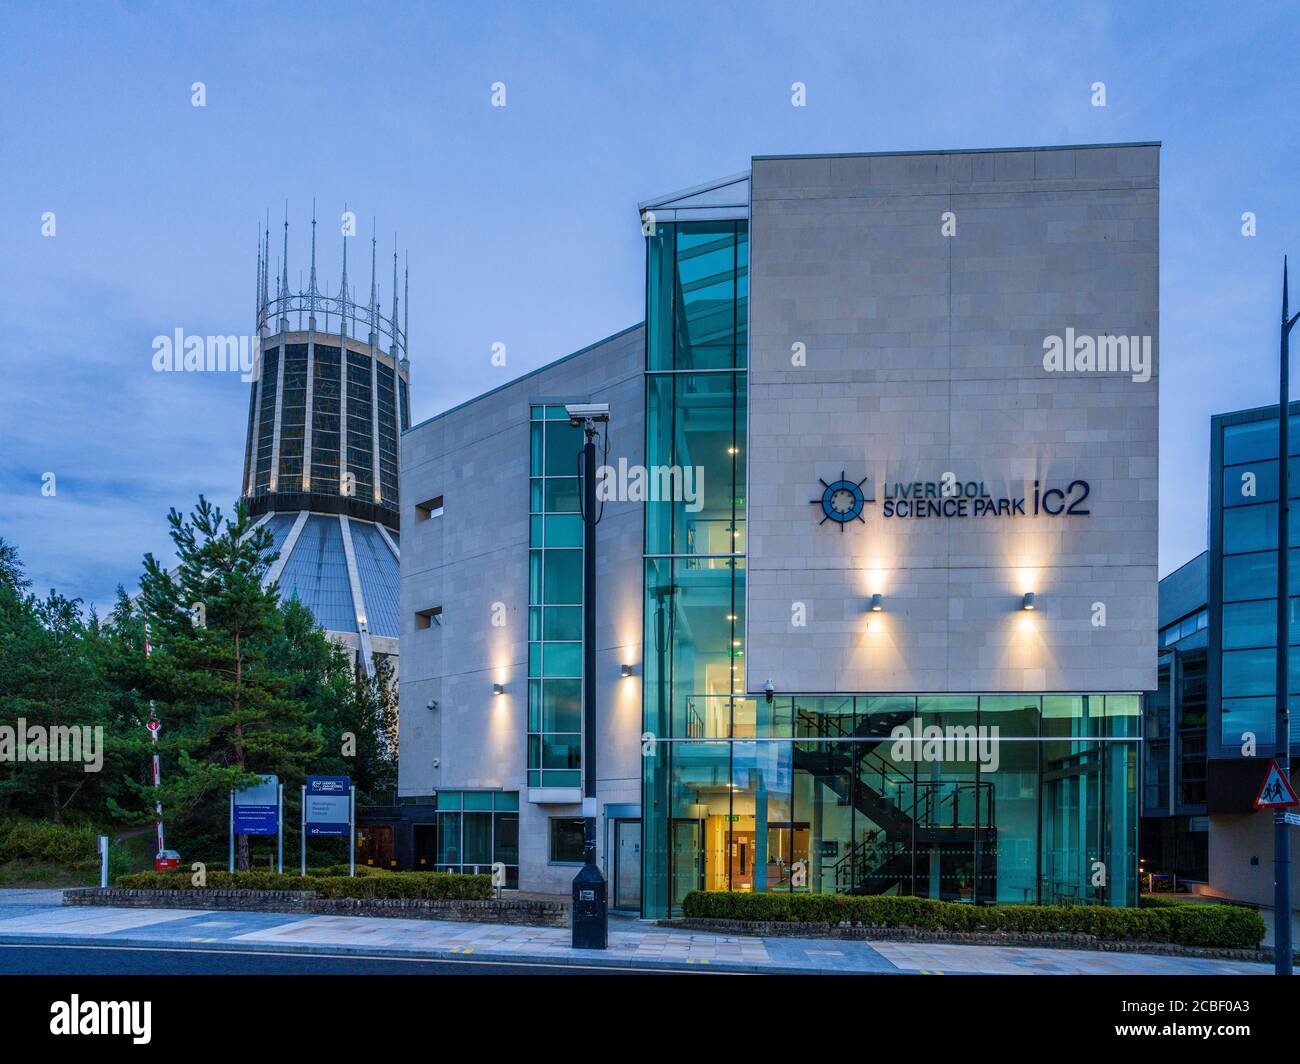 Liverpool Science Park IC2 Innovation Centre 2 building next to Liverpool Metropolitan Cathedral. Architects Falconer Chester Hall, 2009. Stock Photo